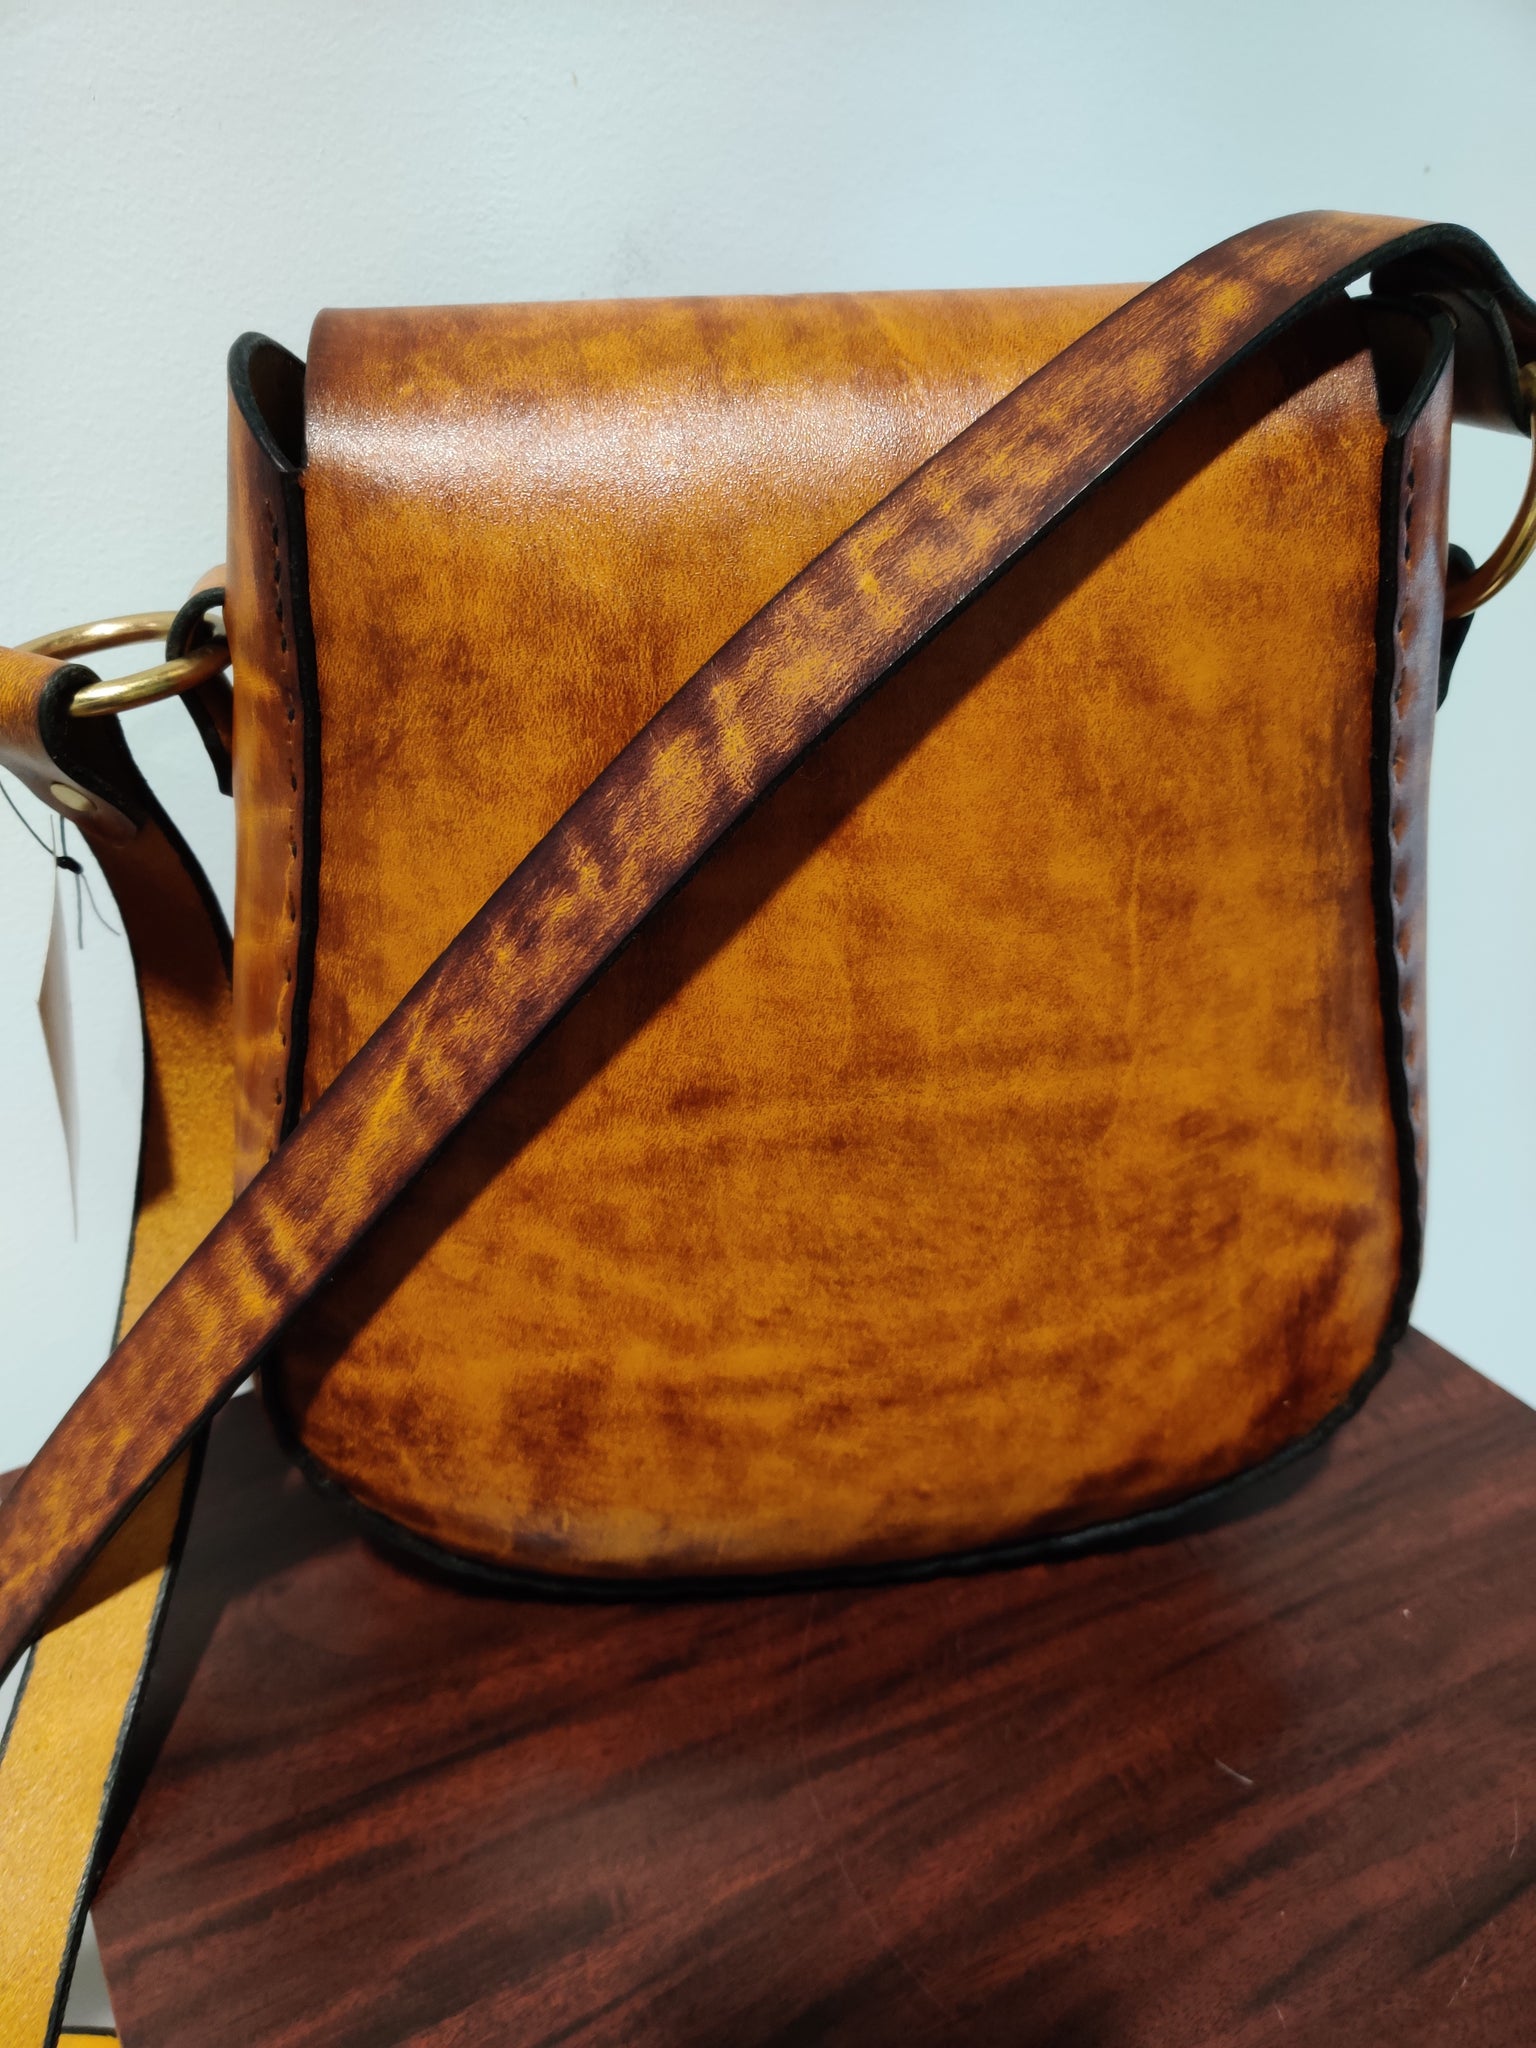 Made to Order - Retro Large Handmade Latigo Leather Shoulder Bag with  Braided Strap - Hand-dyed and hand-stitched - Solid Brass hardware